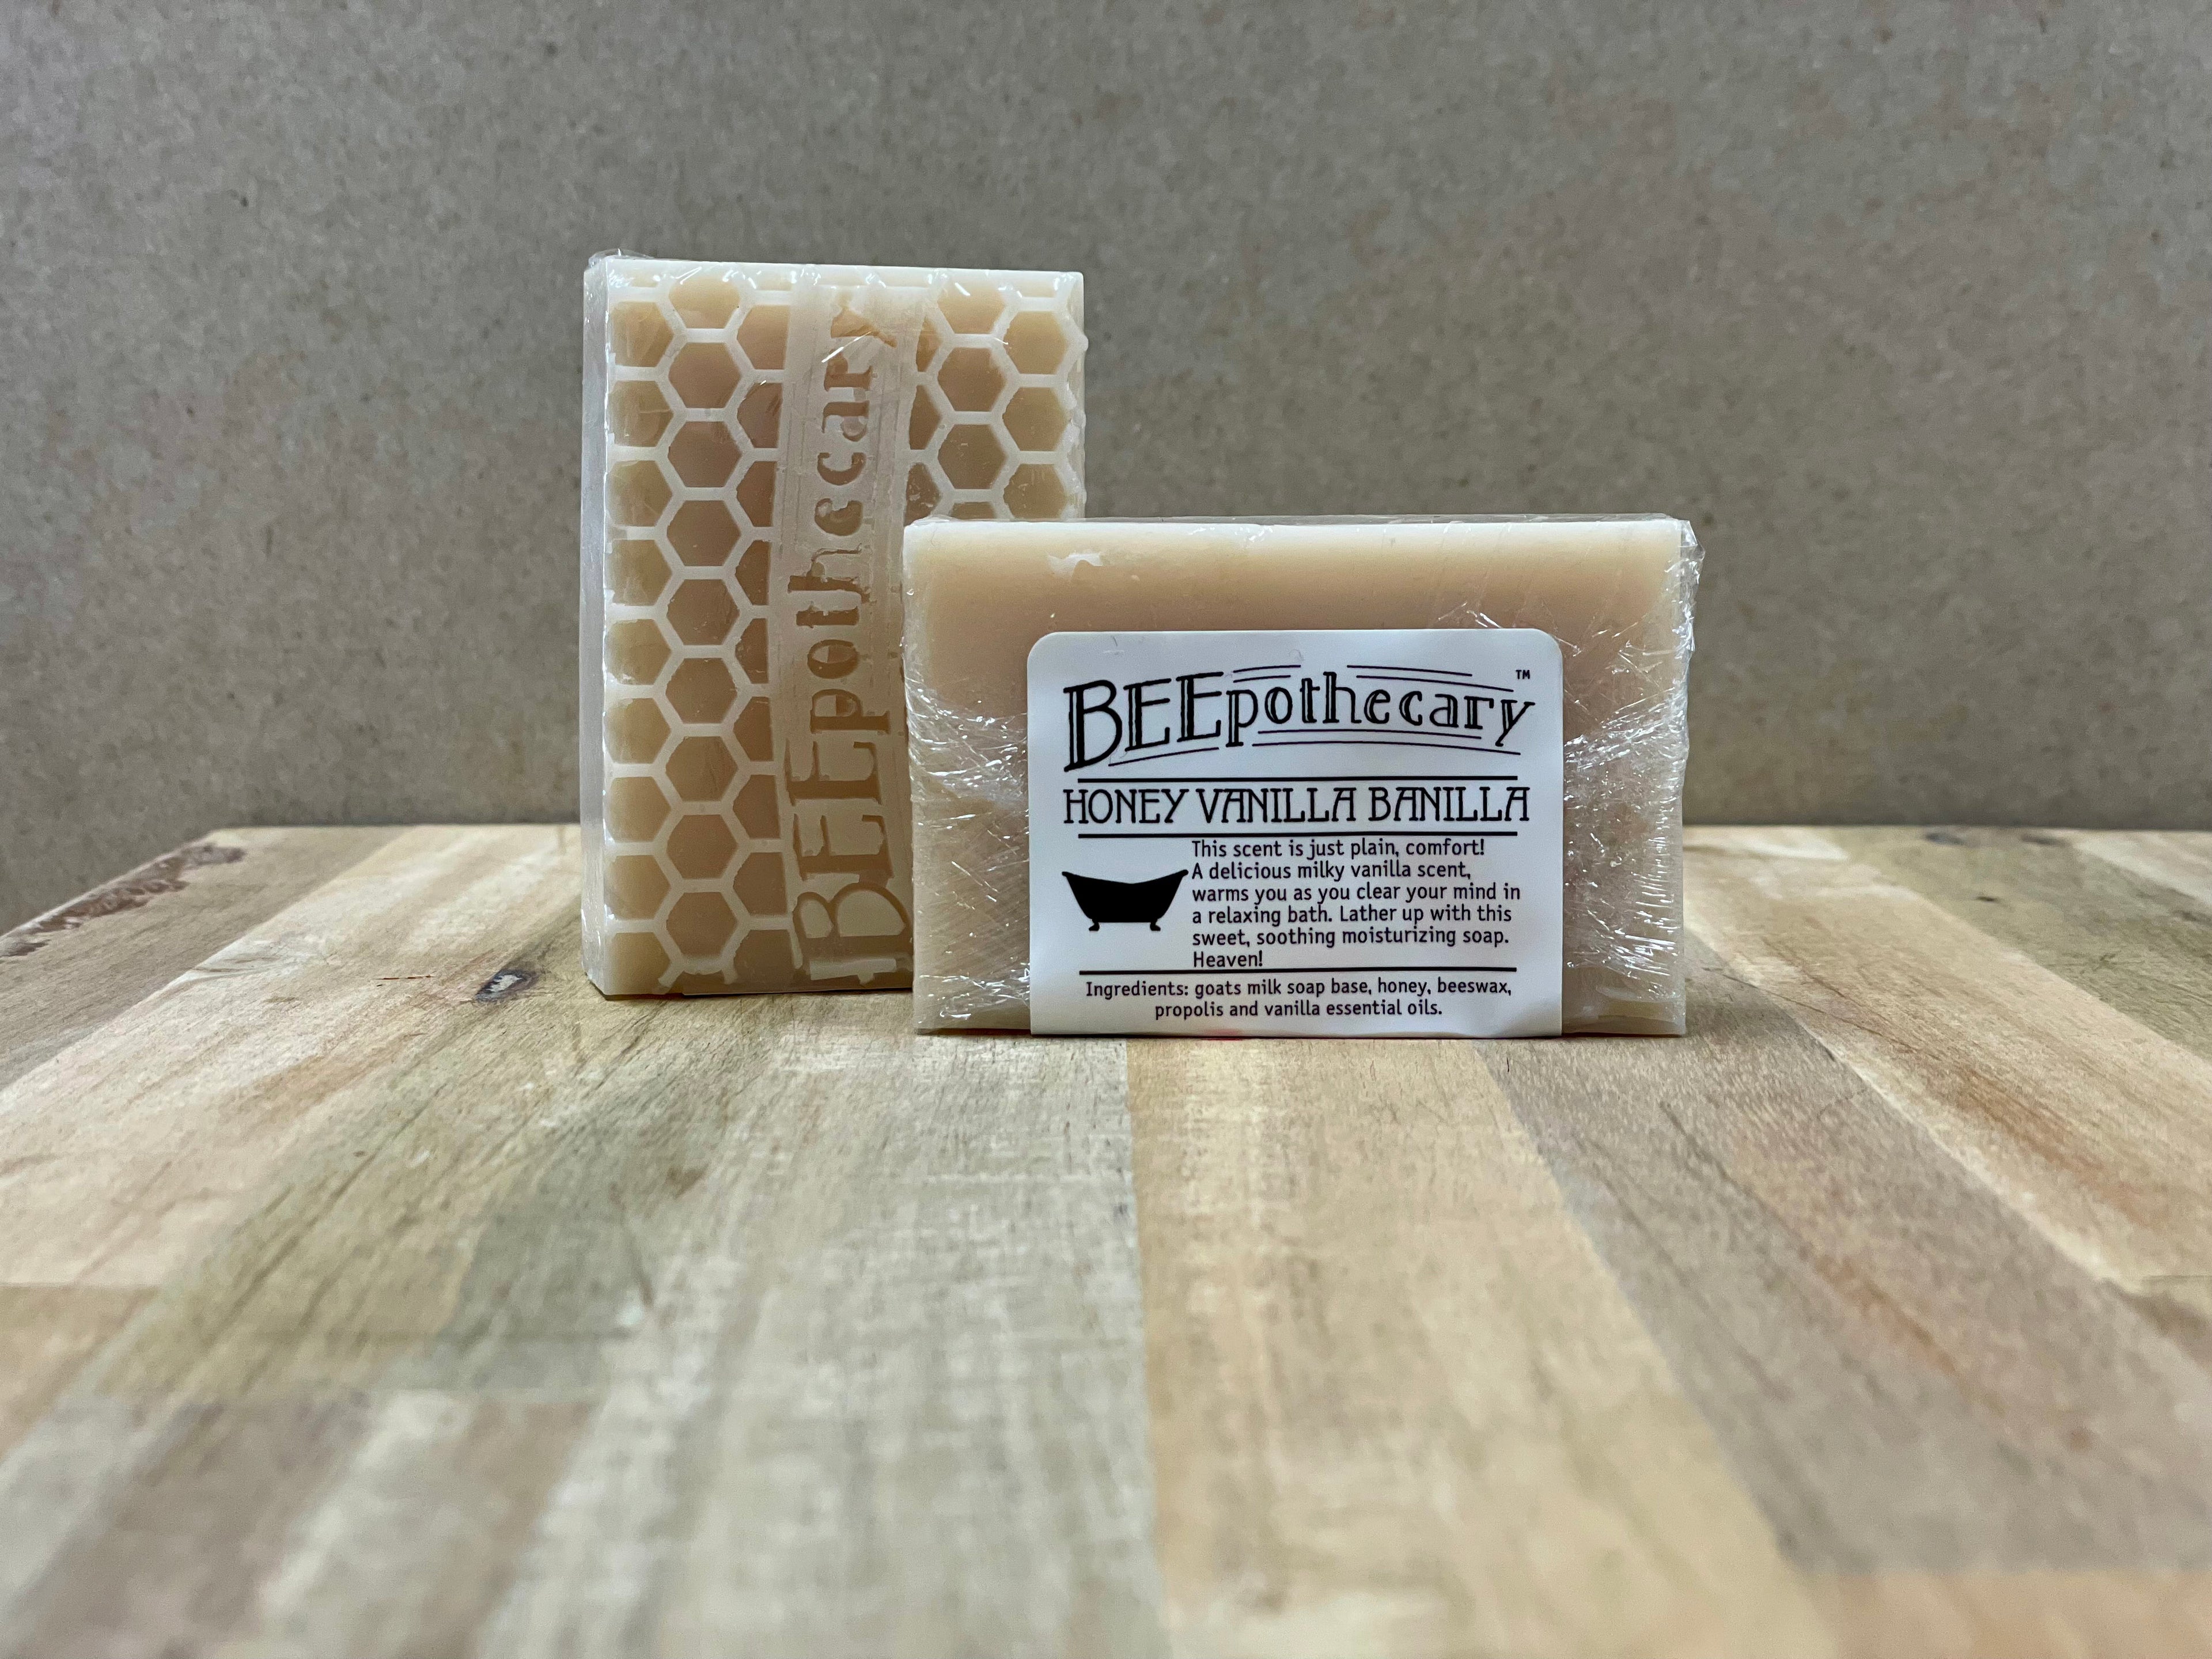 BEEpothecary Goat Milk Soap Honey Vanilla Banilla fragrance in packaging with white label